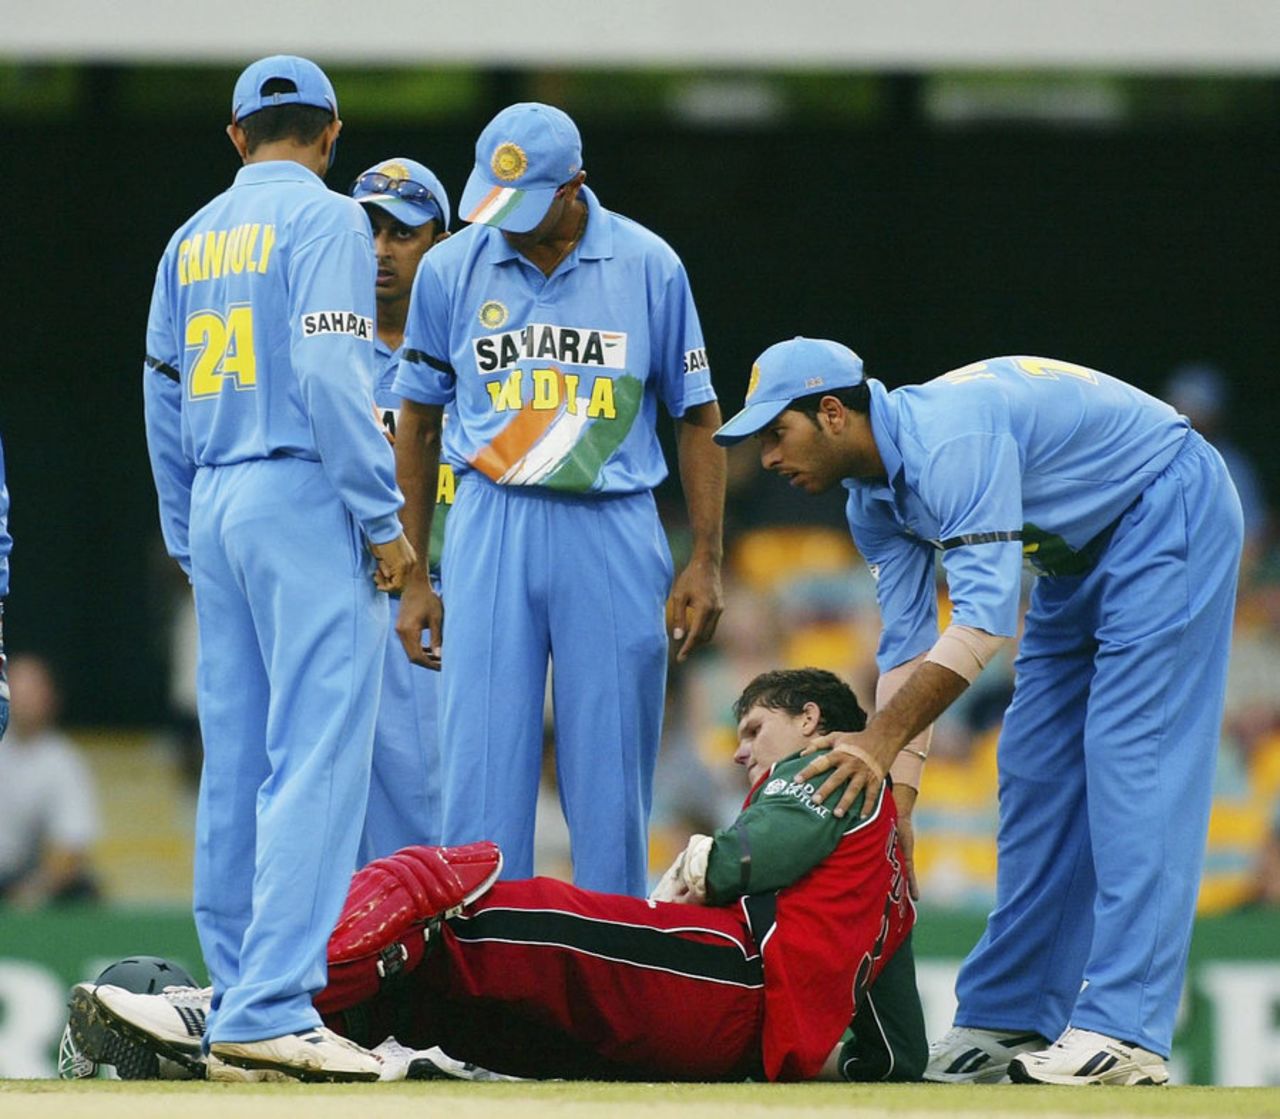 The blow to Mark Vermeulen was so sickening that even the opposition was worried, India v Zimbabwe, VB Series, Brisbane, 6th ODI, January 20, 2004